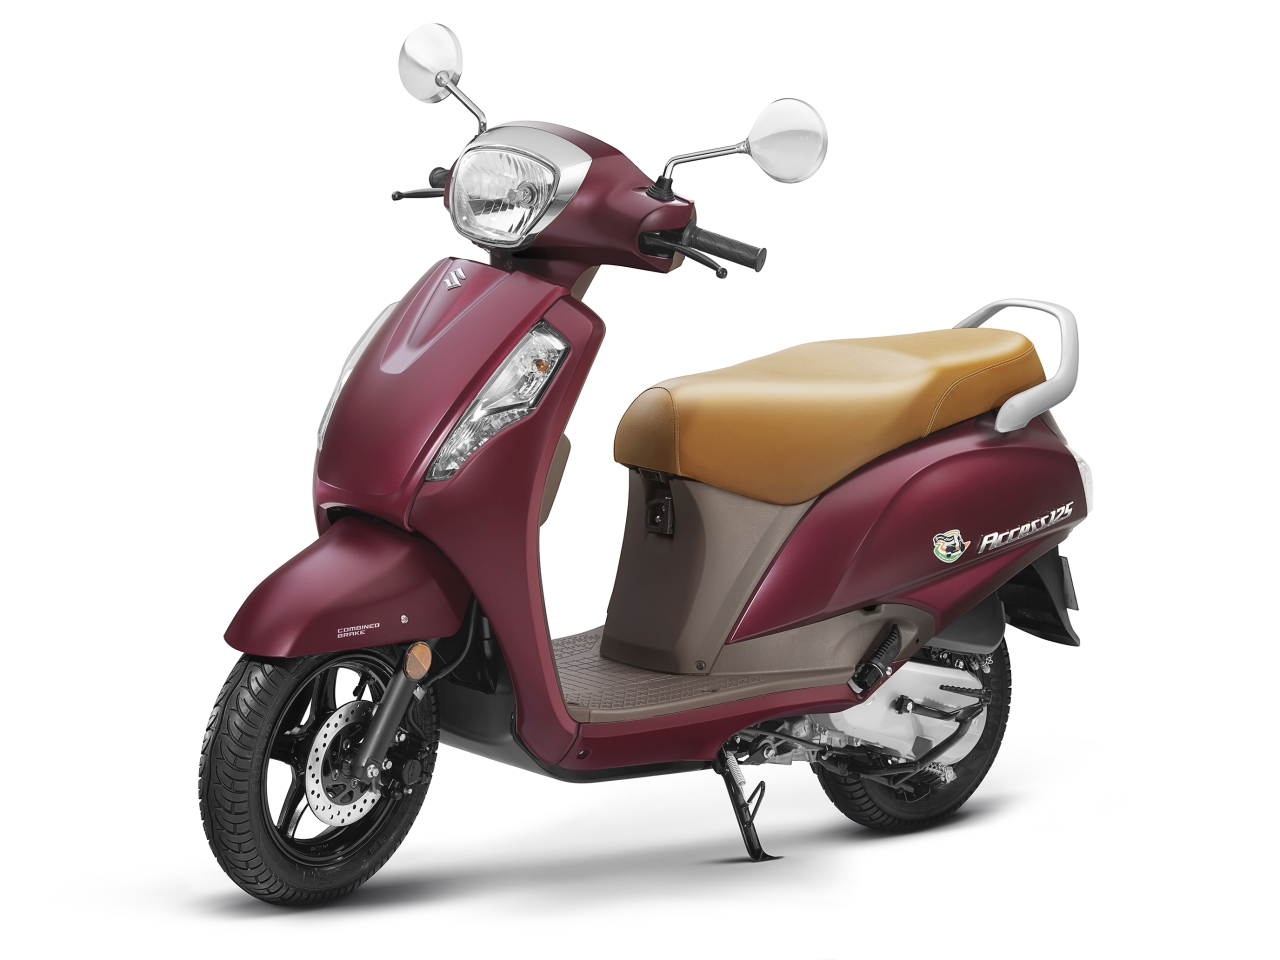 Top 10 Best Selling Automatic Scooter In India June 2019